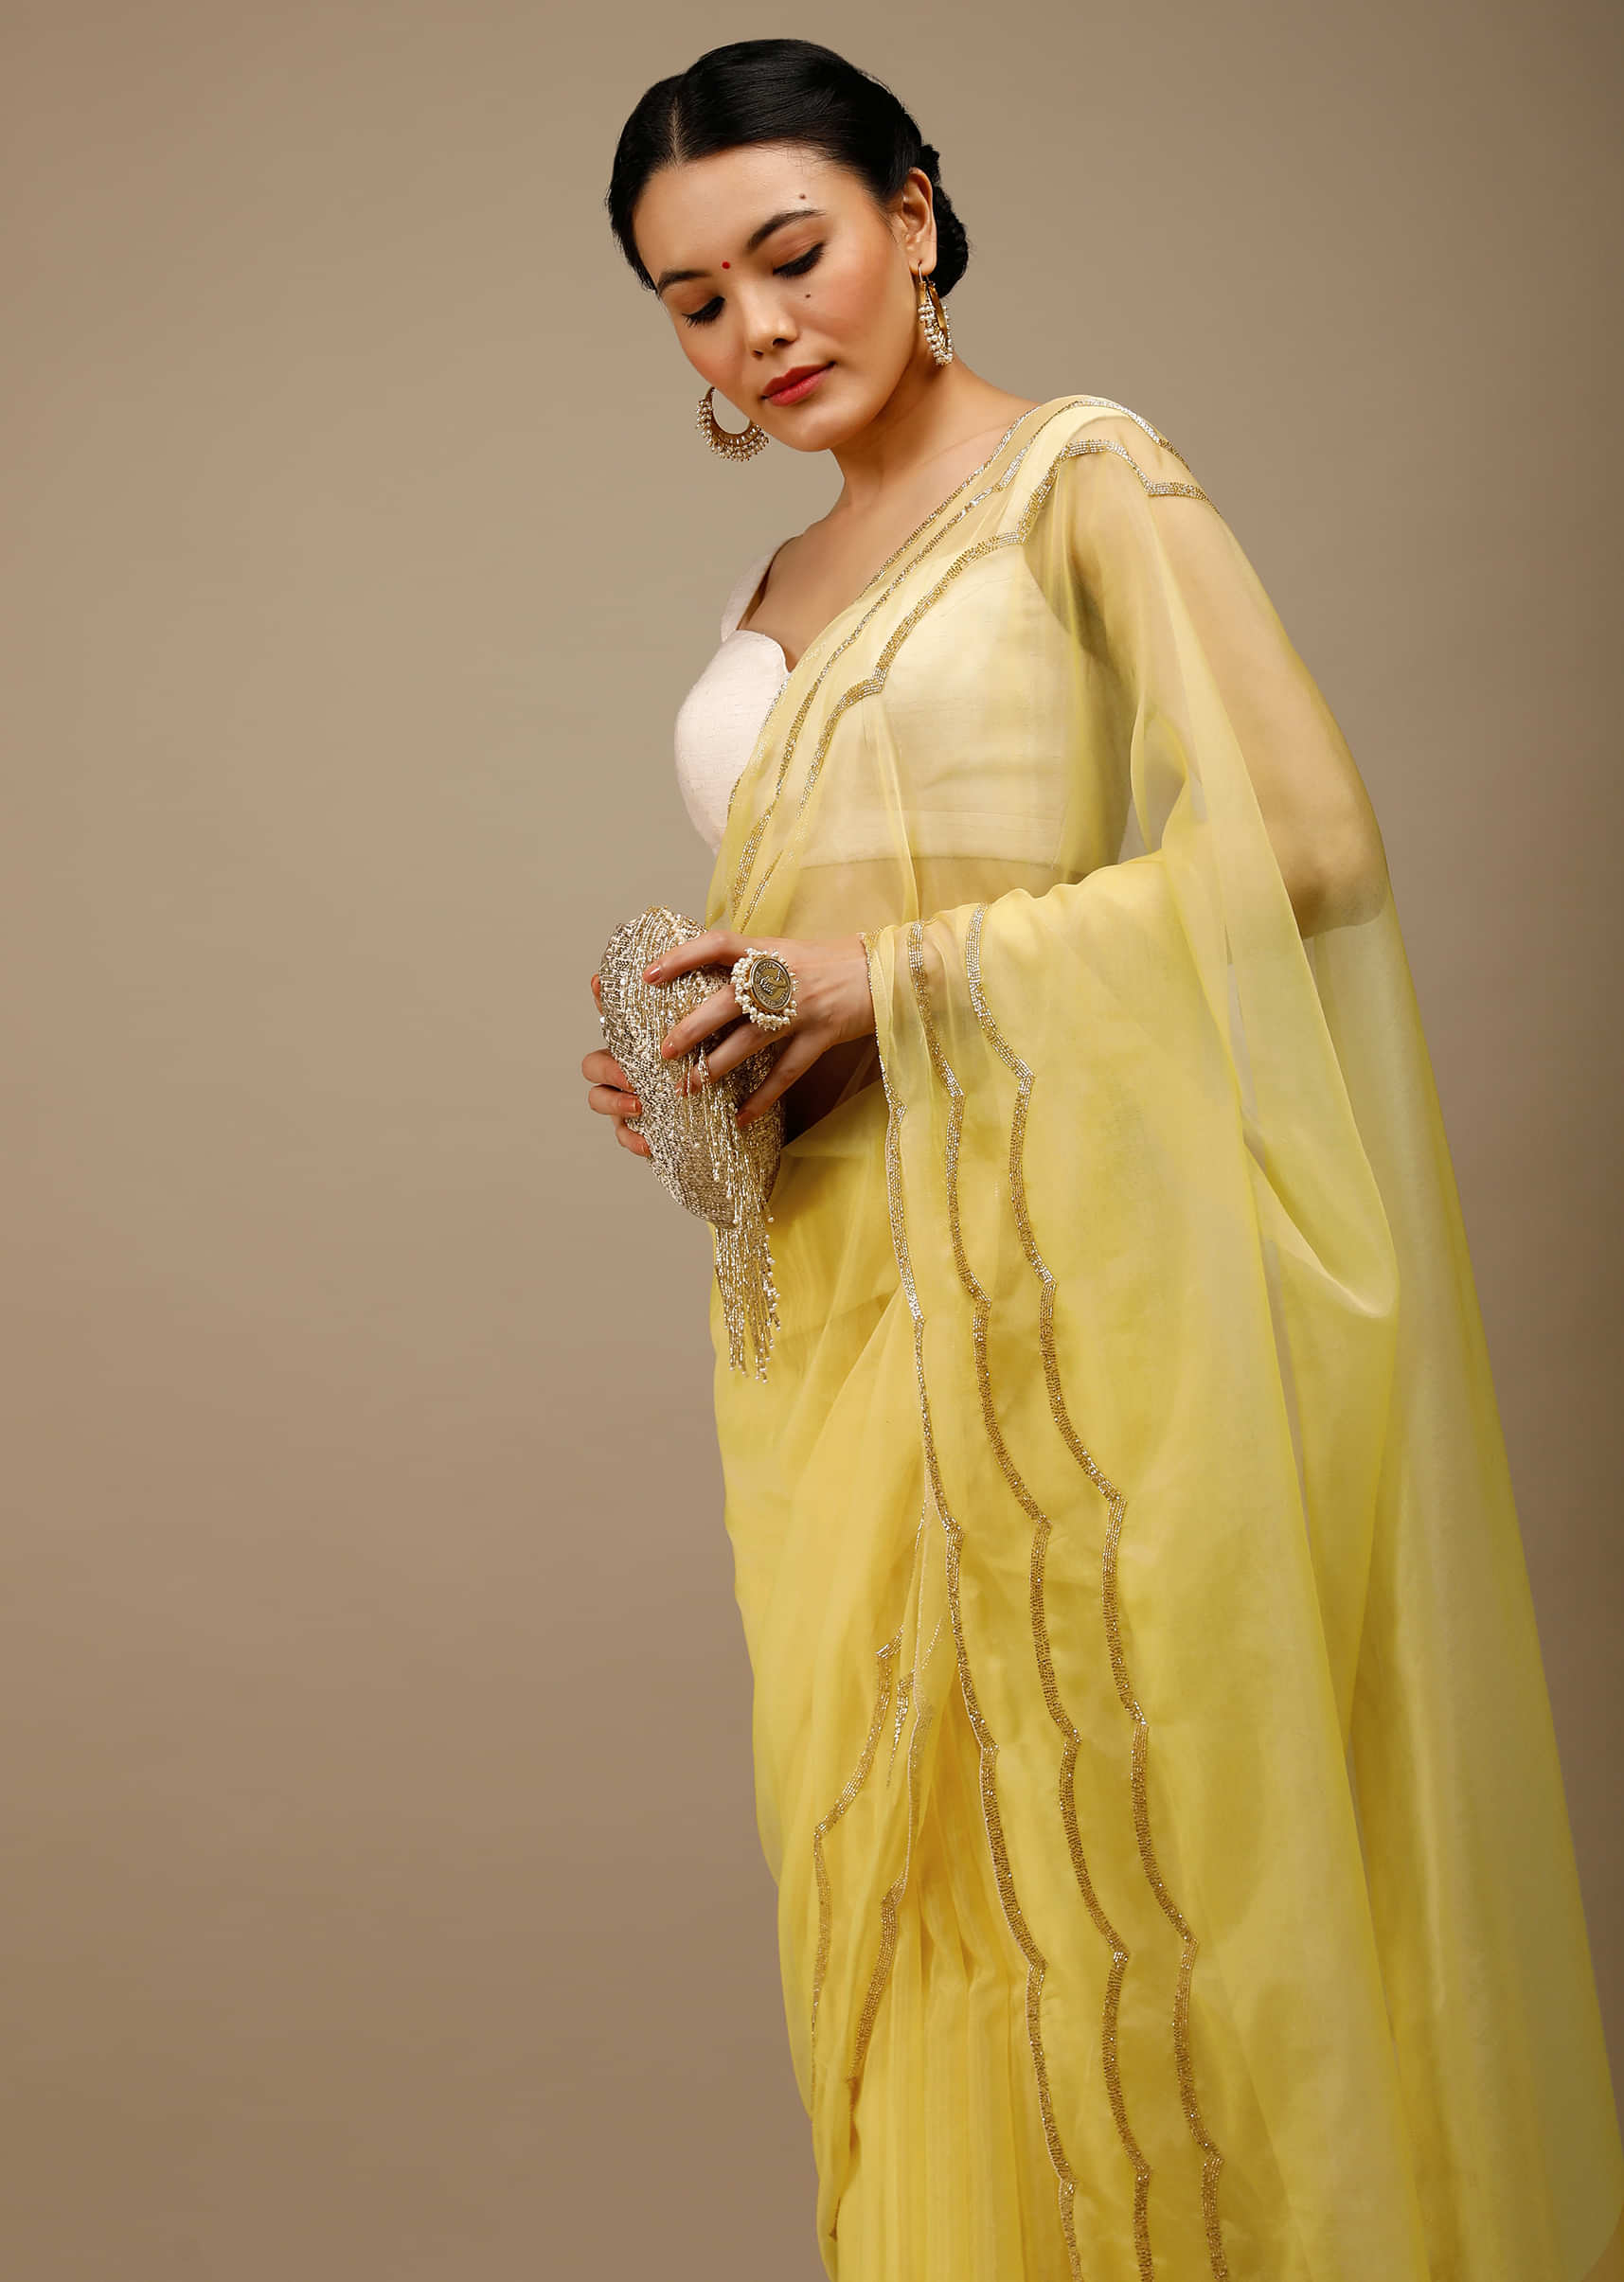 Popcorn Yellow Saree In Organza With Cut Dana Embroidered Scallop Cut Border And Moti Fringes On The Pallu  